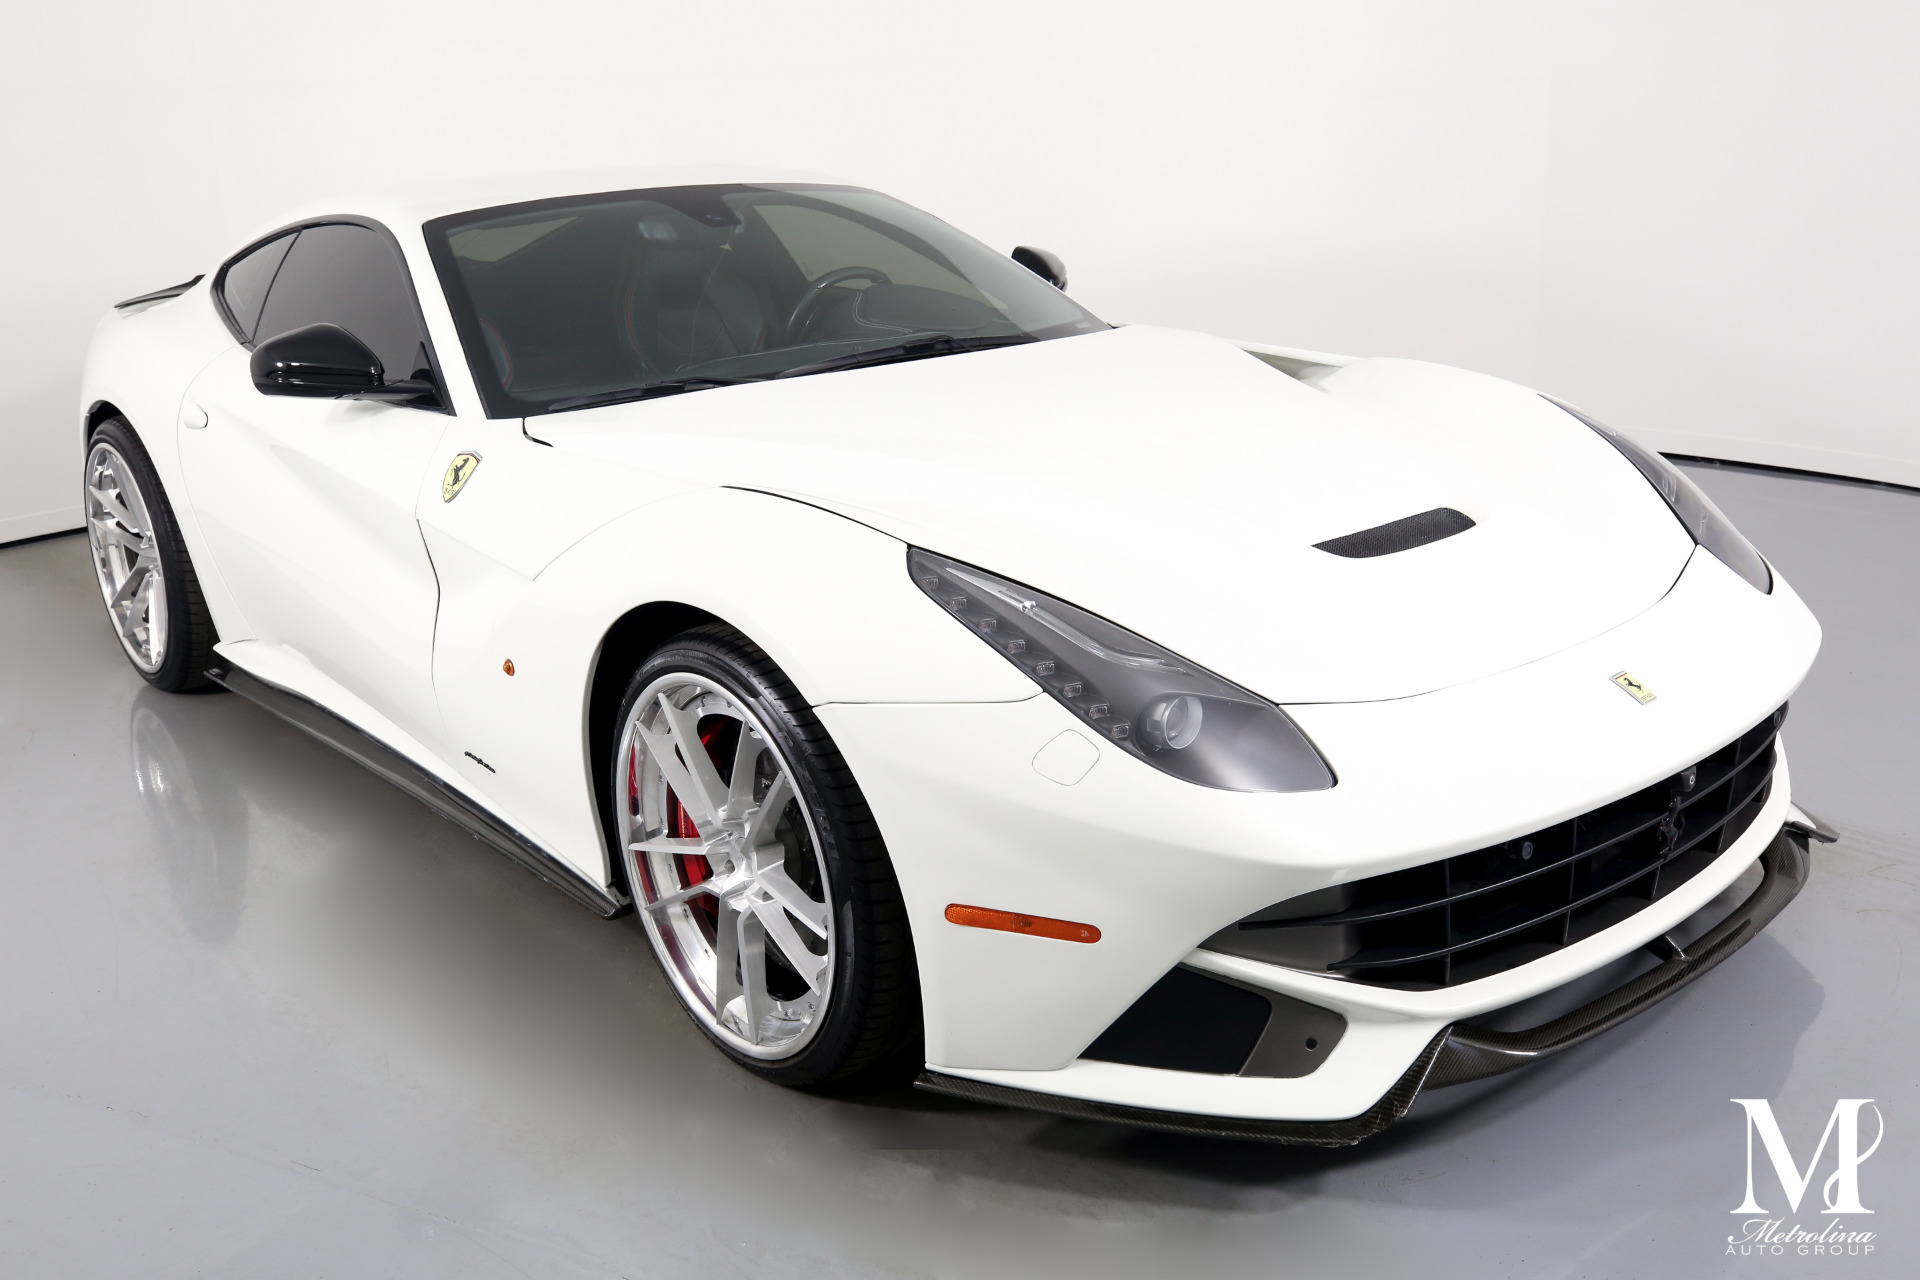 Used 2013 Ferrari F12berlinetta for sale Sold at Metrolina Auto Group in Charlotte NC 28217 - 2